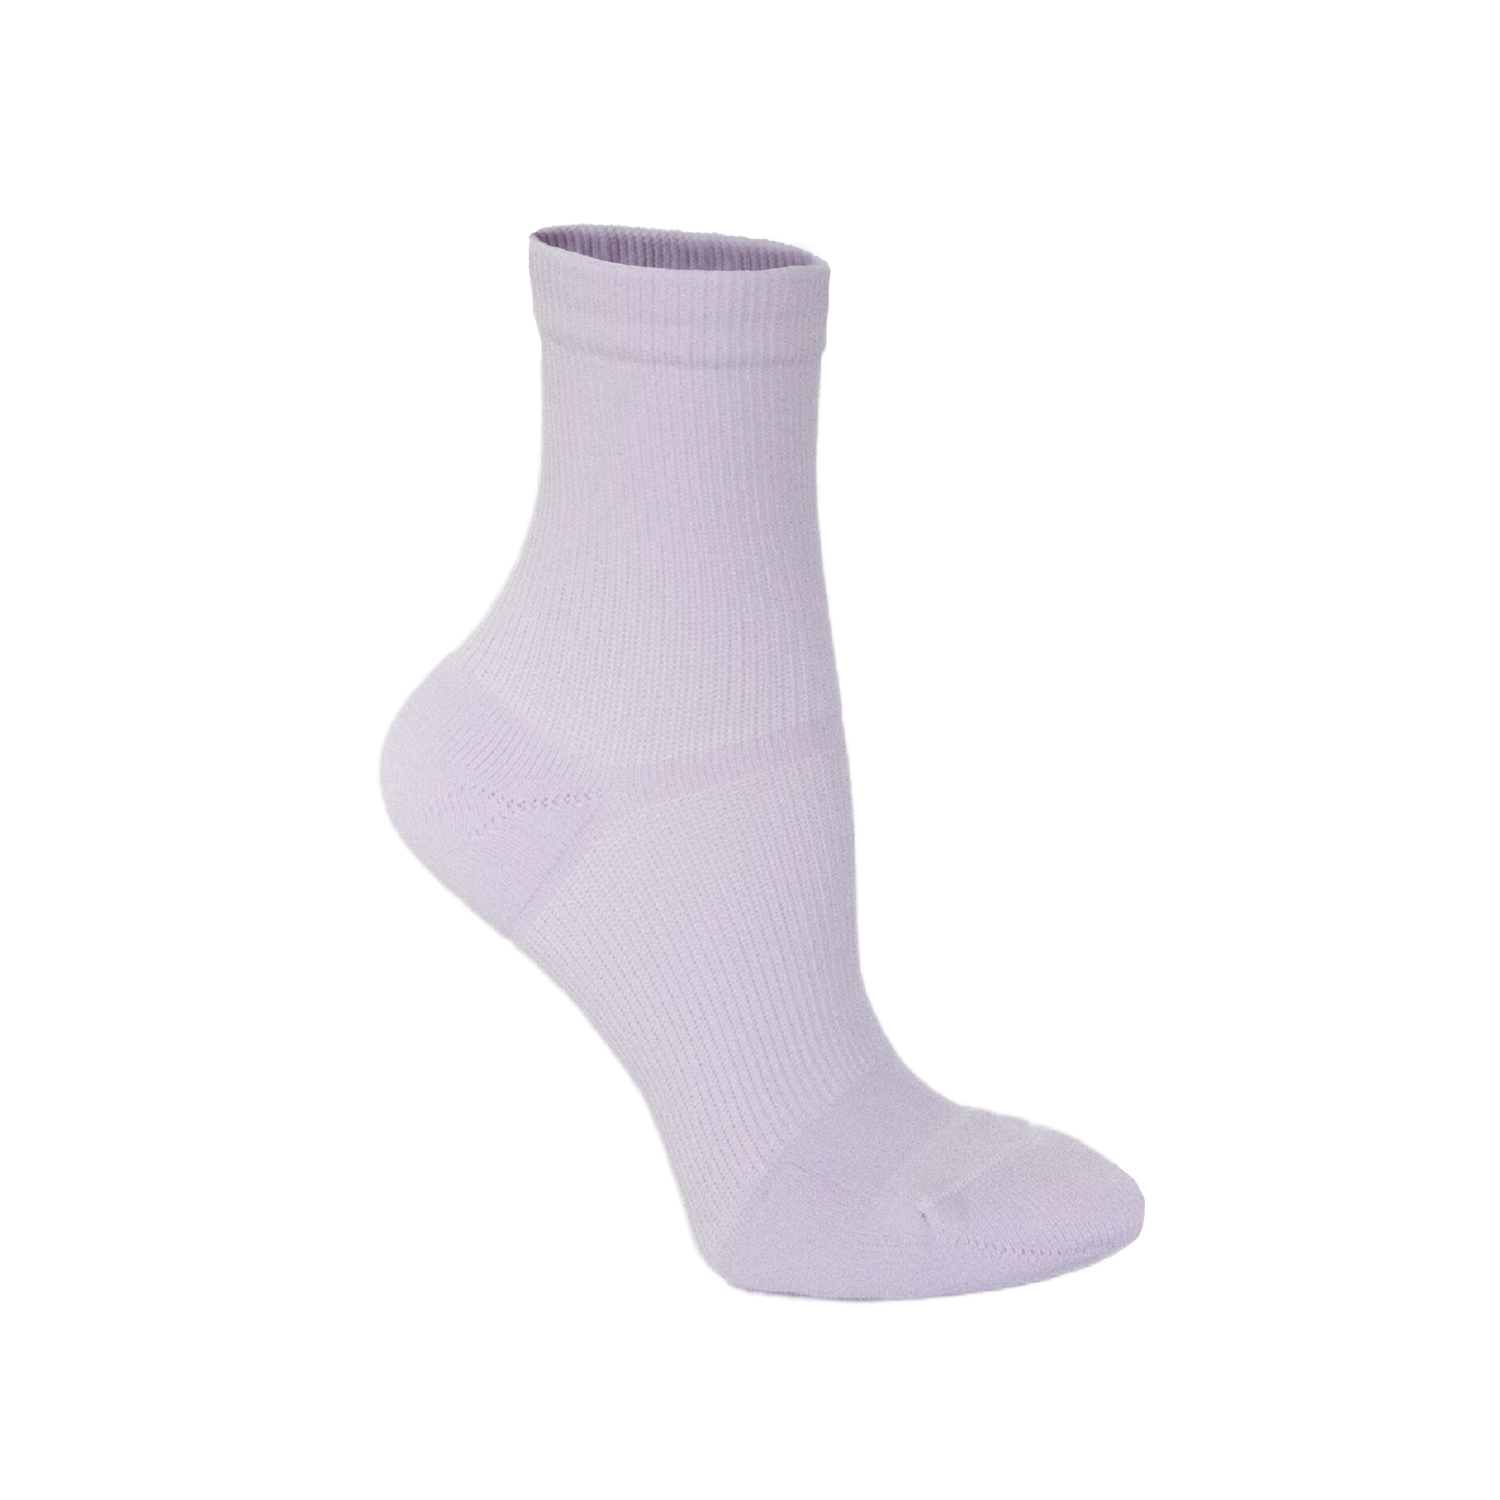 Girl's Non-Slip Socks in Eco-friendly Certified Cotton (3 pairs)